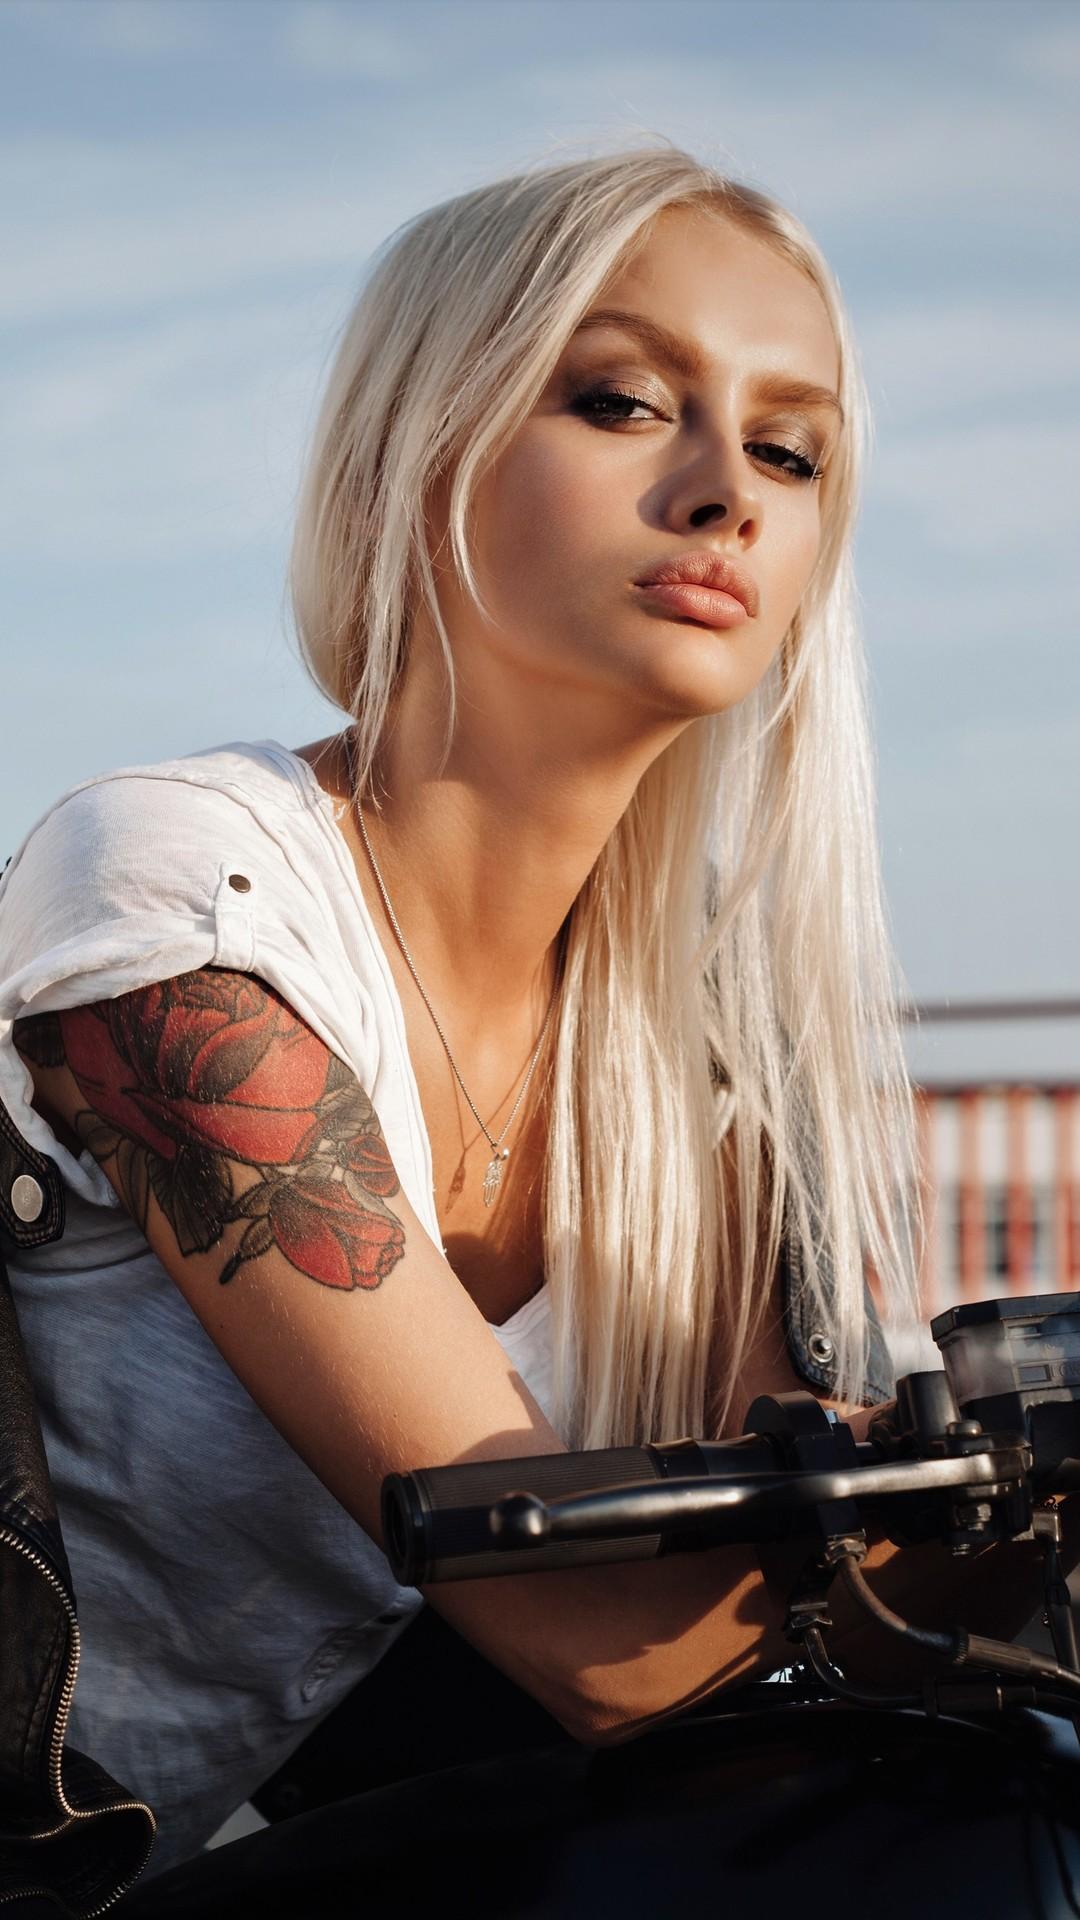 Tattoo Girl On Motorcycle 5k iPhone 6s, 6 Plus